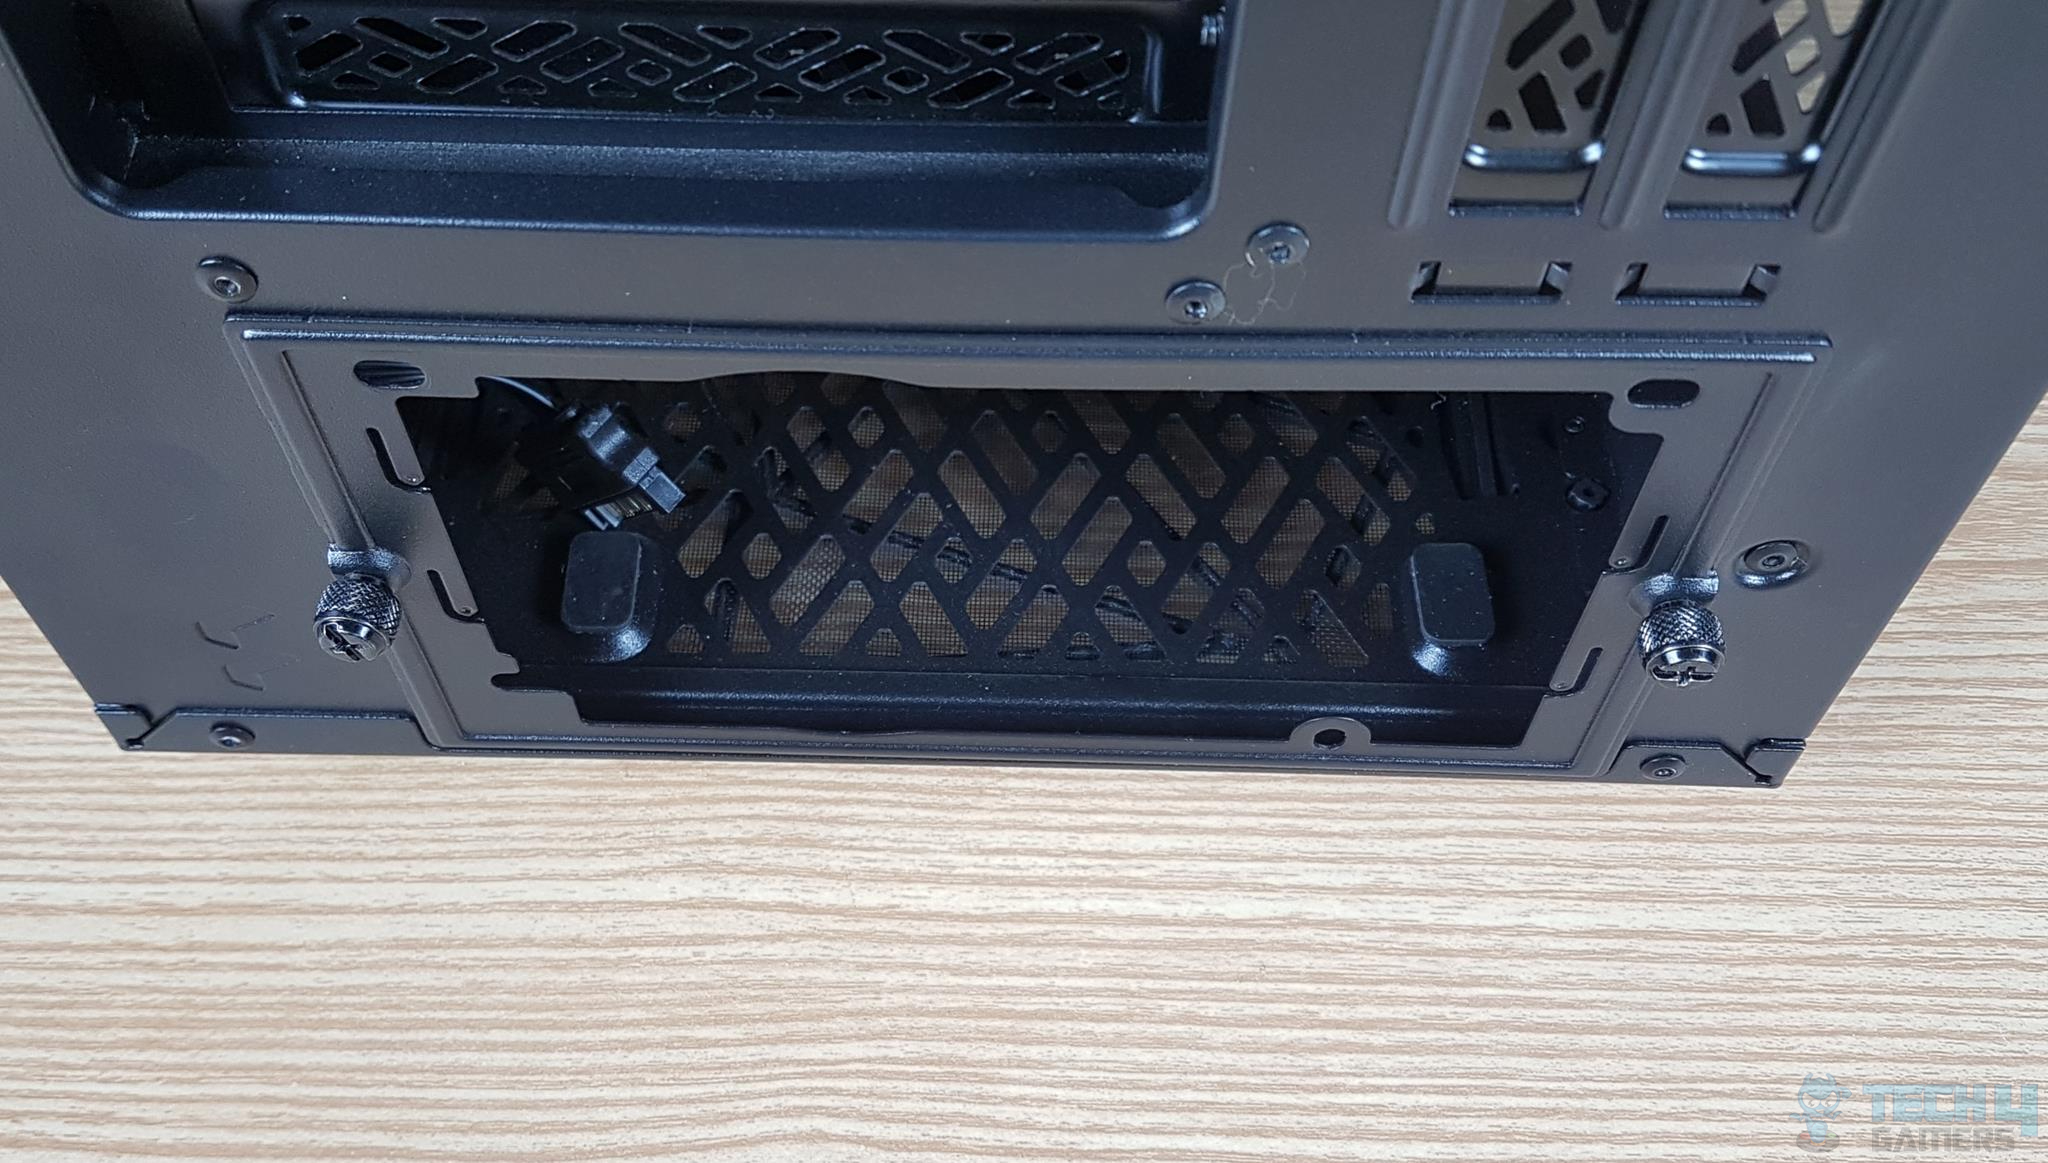 PSU slot at the bottom (Image By Tech4Gamers)